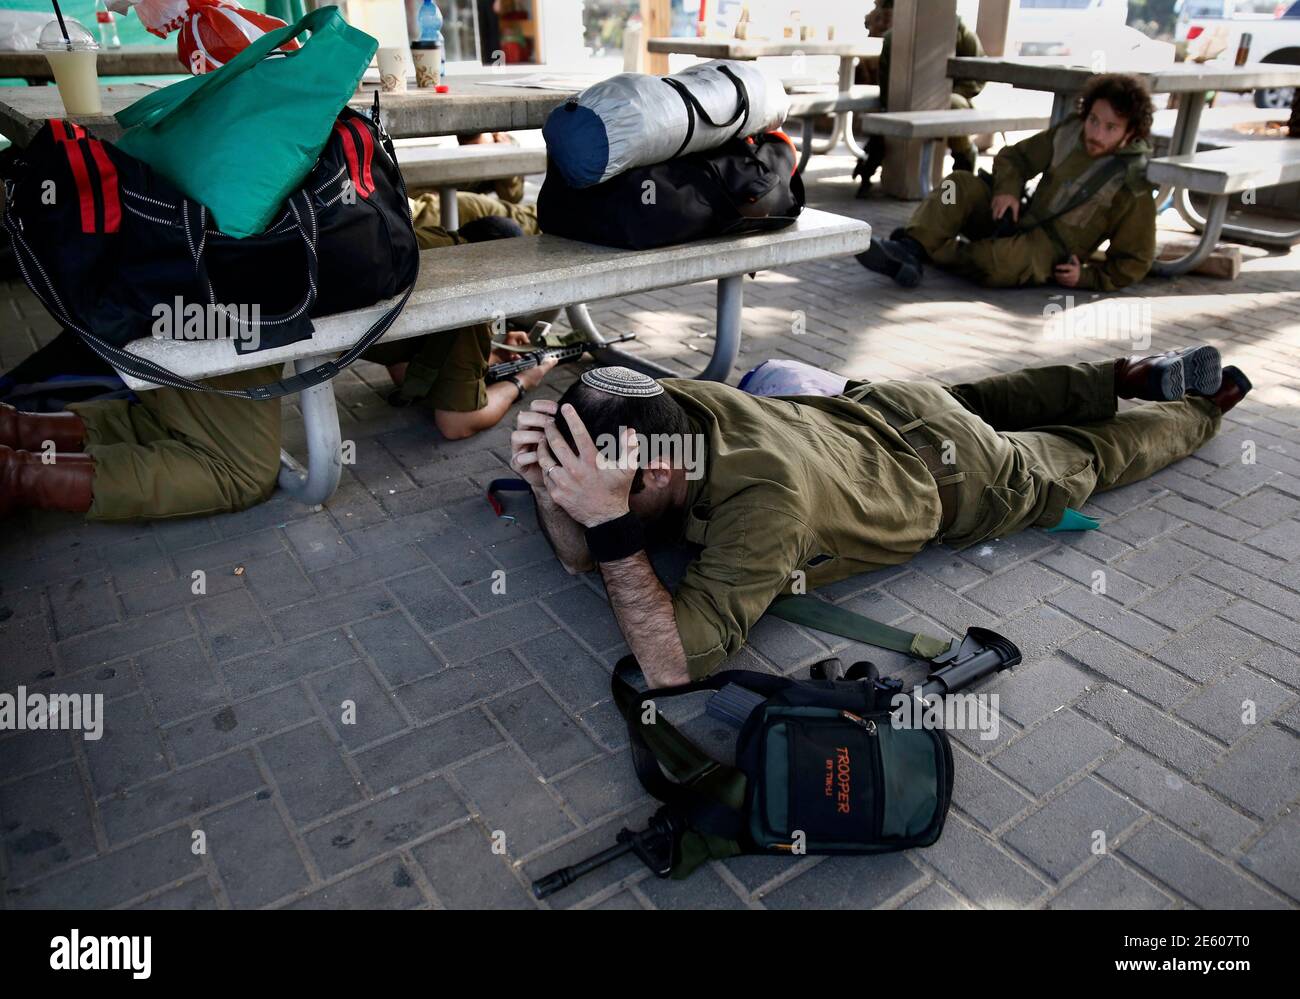 israeli-soldiers-take-cover-as-a-siren-sounds-warning-of-incoming-rockets-outside-a-coffee-shop-at-kibbutz-yad-mordechai-near-the-border-with-northern-gaza-november-21-2012-israeli-air-strikes-shook-the-gaza-strip-and-palestinian-rockets-struck-across-the-border-as-us-secretary-of-state-hillary-clinton-held-talks-in-jerusalem-in-the-early-hours-of-wednesday-seeking-a-truce-that-can-hold-back-israels-ground-troops-reutersyannis-behrakis-israel-tags-civil-unrest-military-politics-tpx-images-of-the-day-conflict-2E607T0.jpg